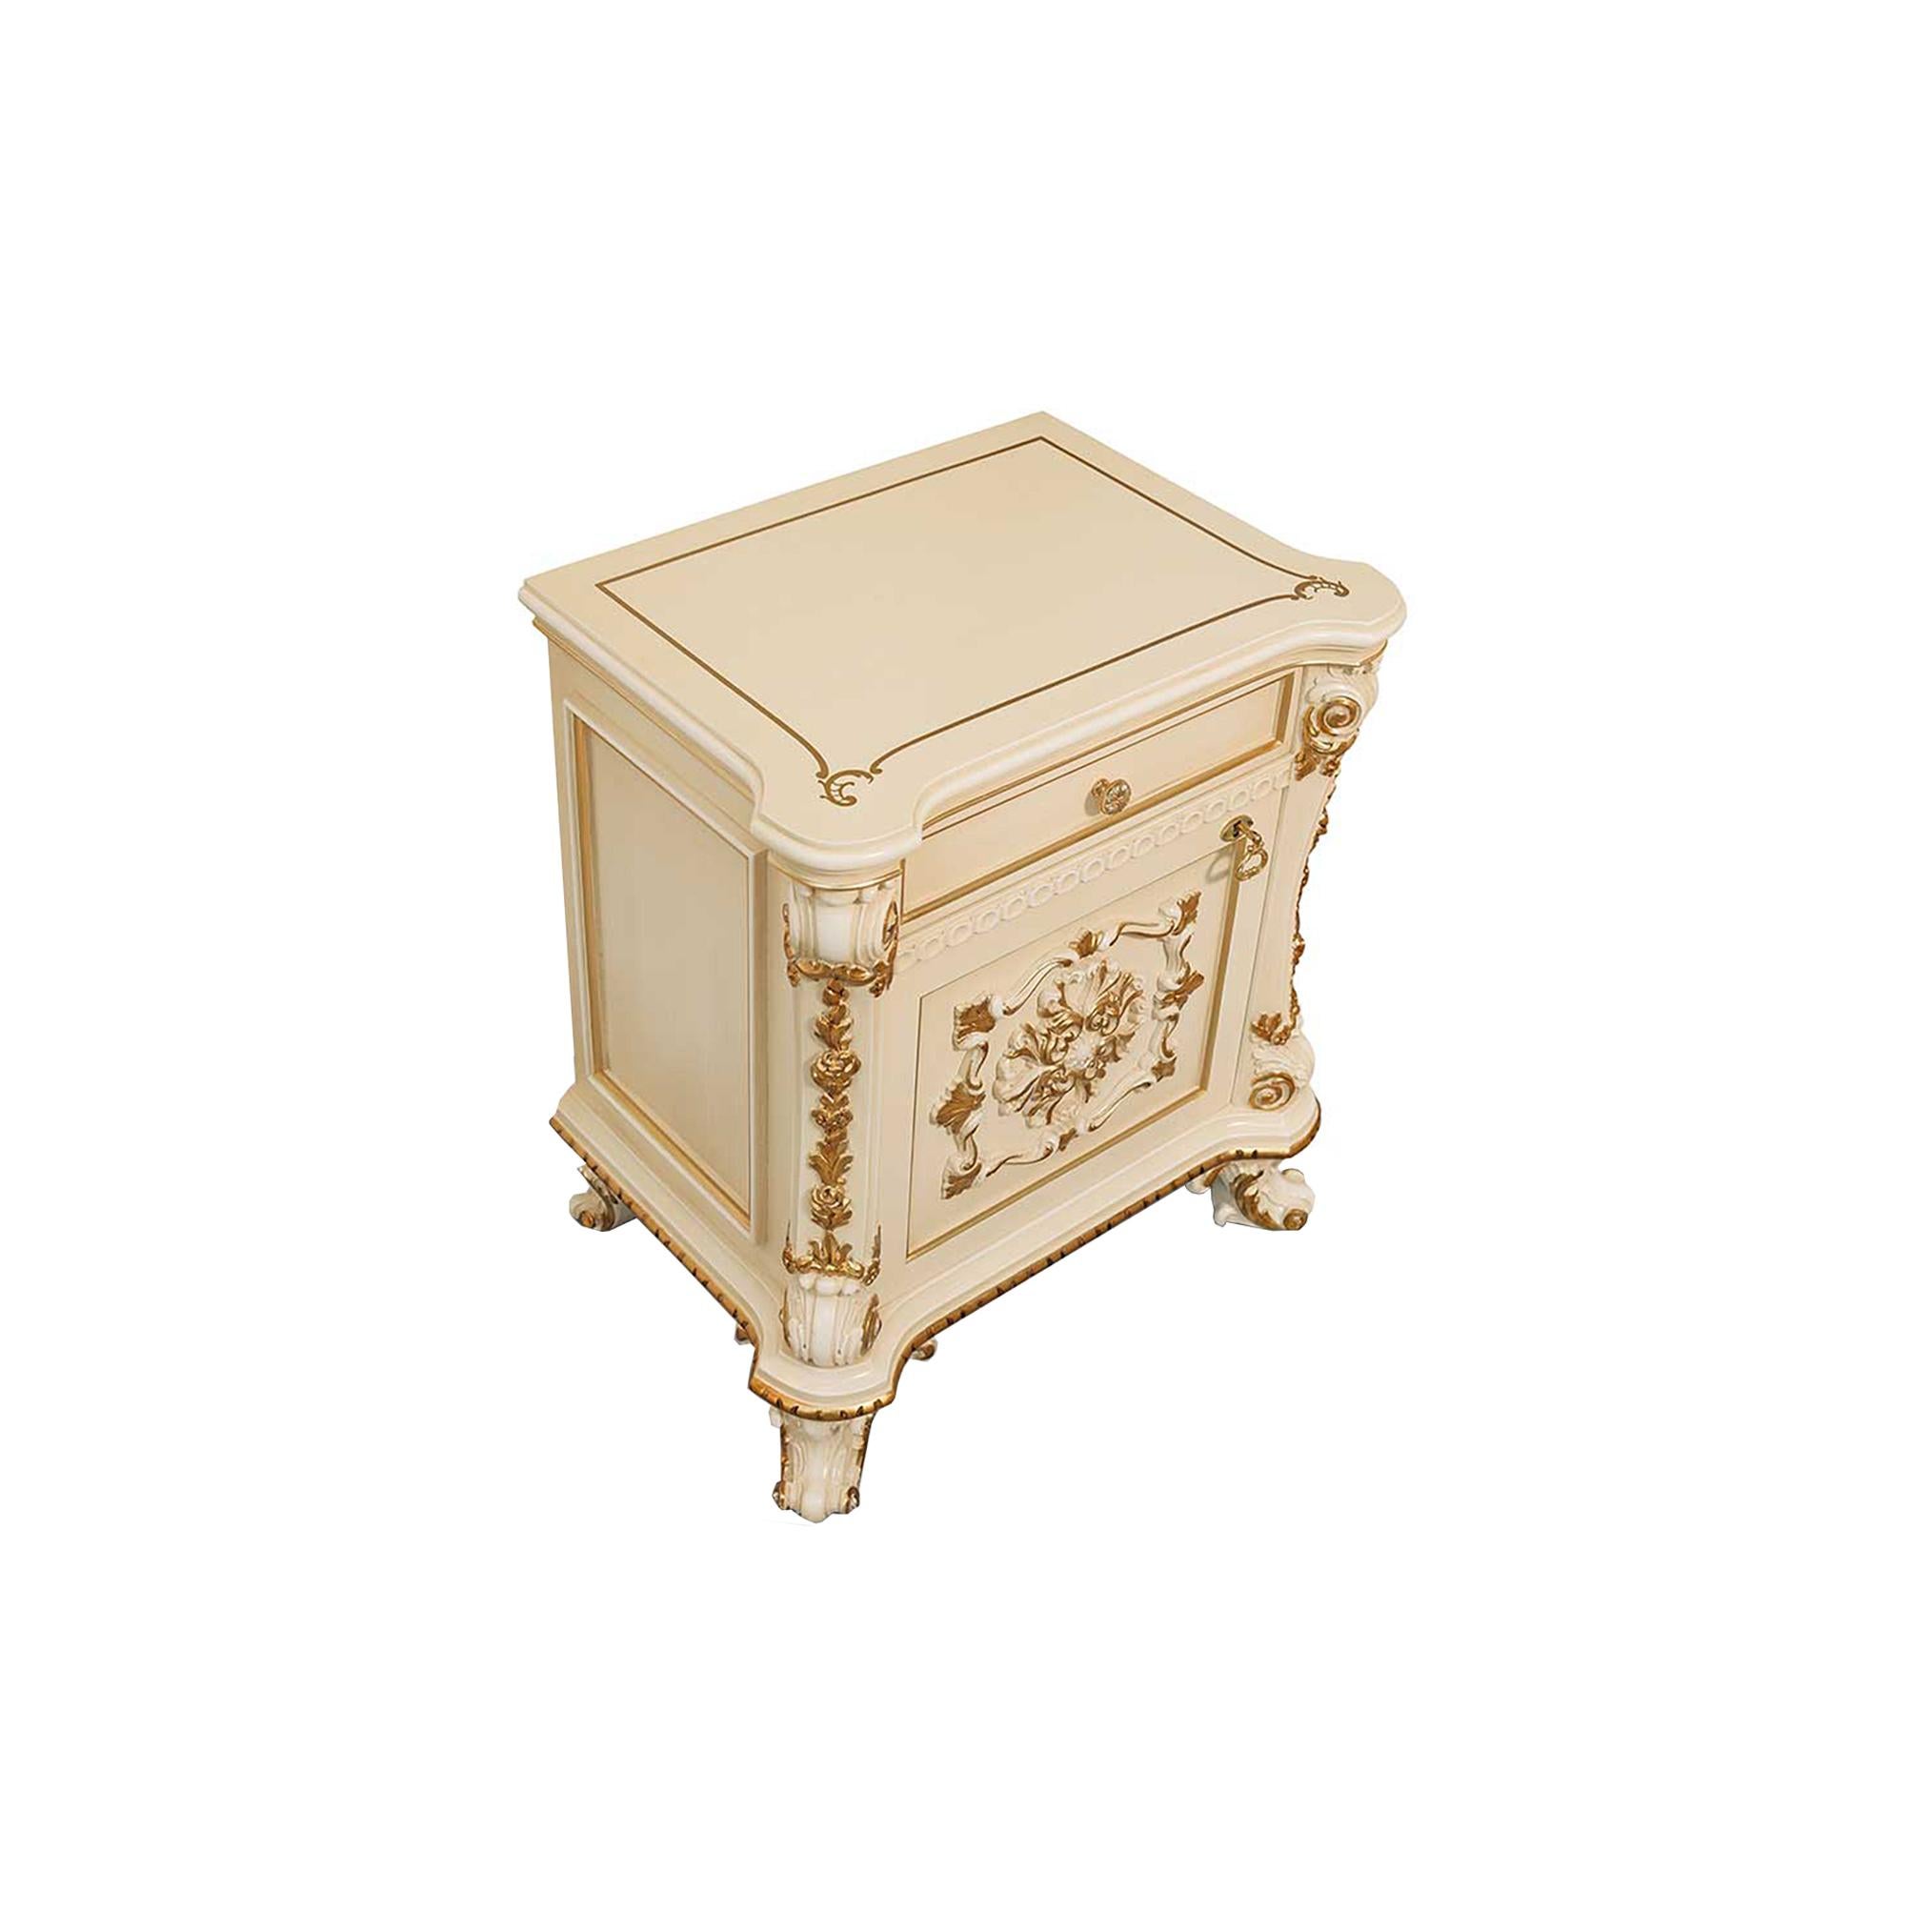 Modenese Gastone Interiors producer is proud to promote this brand new luxury night stand in solid giltwood from its Deluxe catalogue. This figured night stand features a lacquered ivory finish, baroque legs and carvings carefully hand-decorated